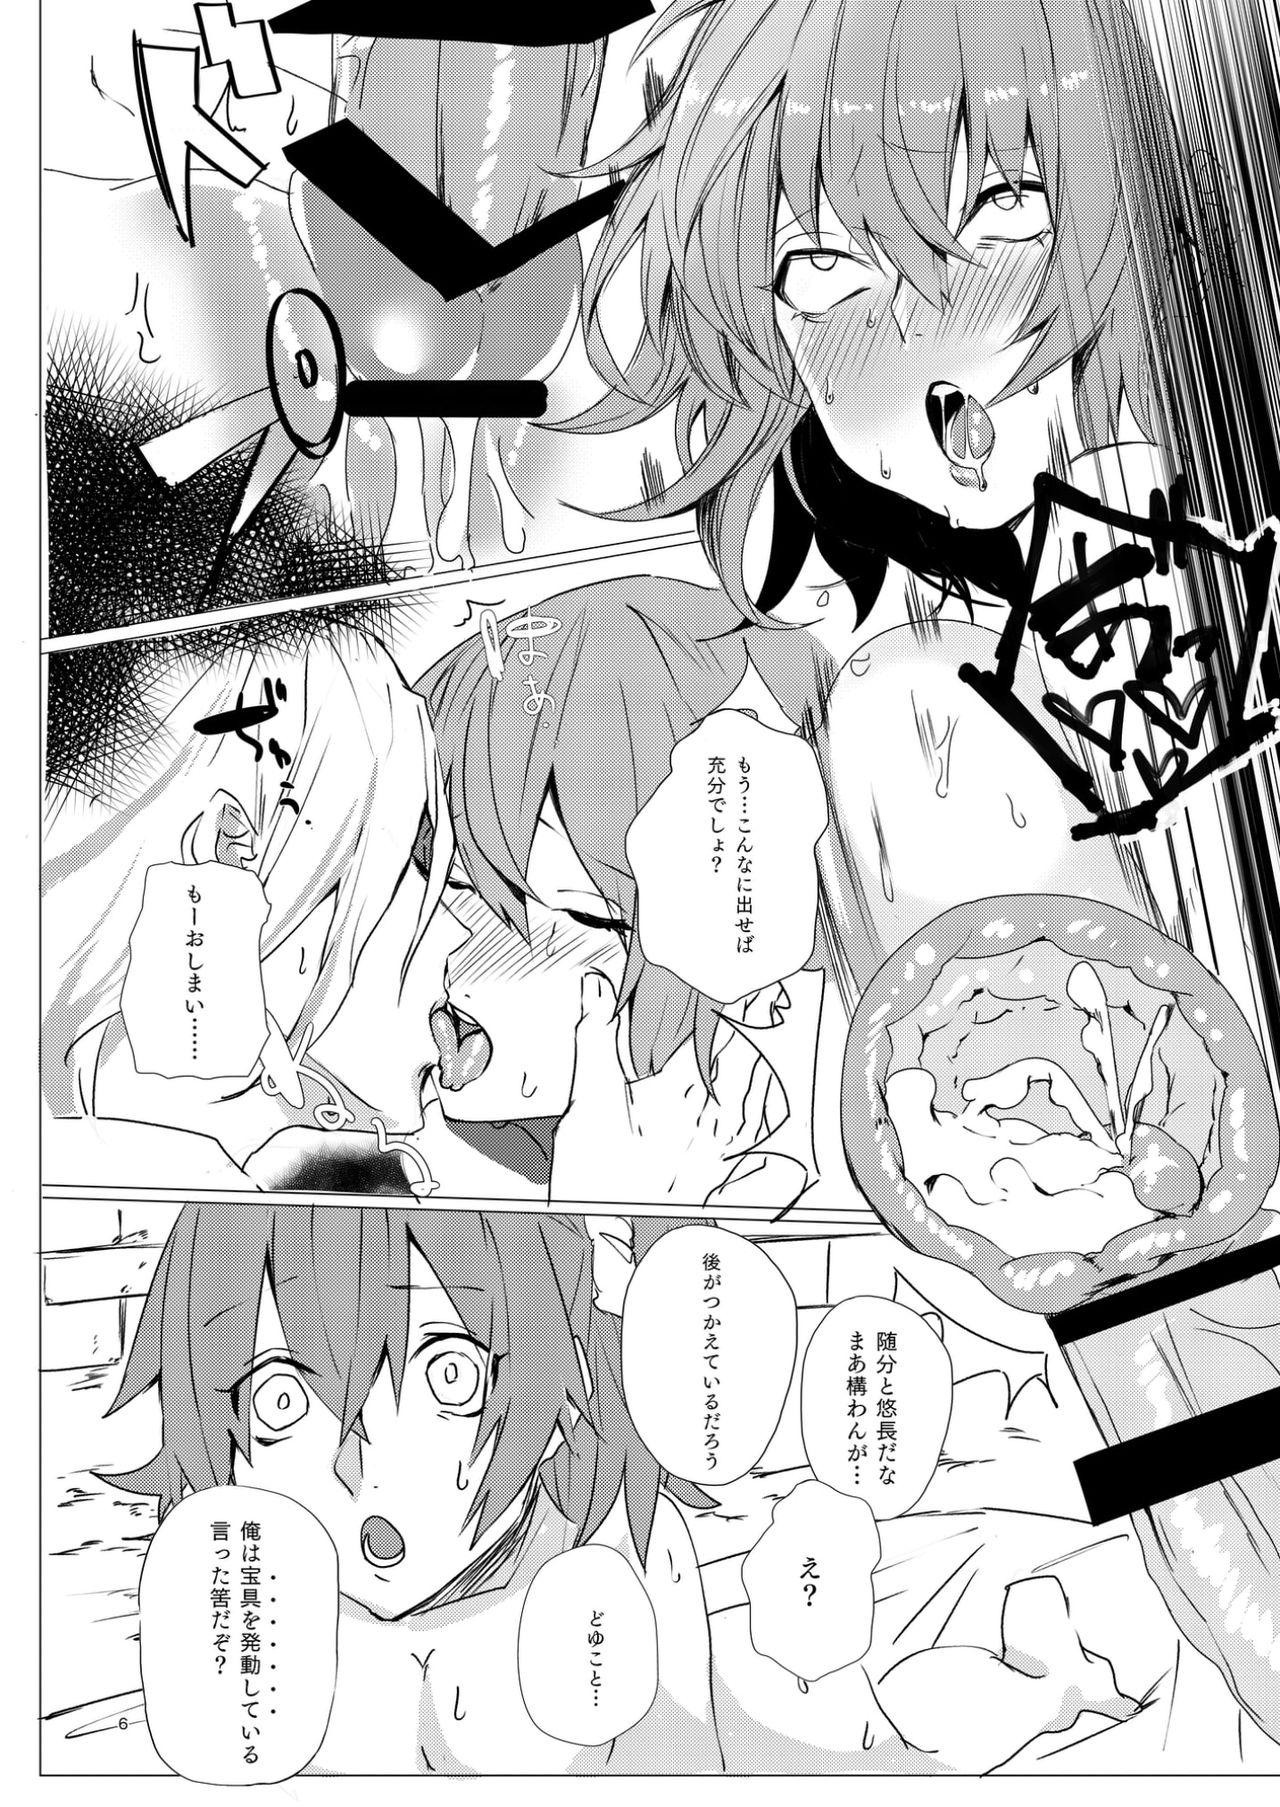 Roludo ]one hundred monte cristo - Fate grand order Nylons - Page 7